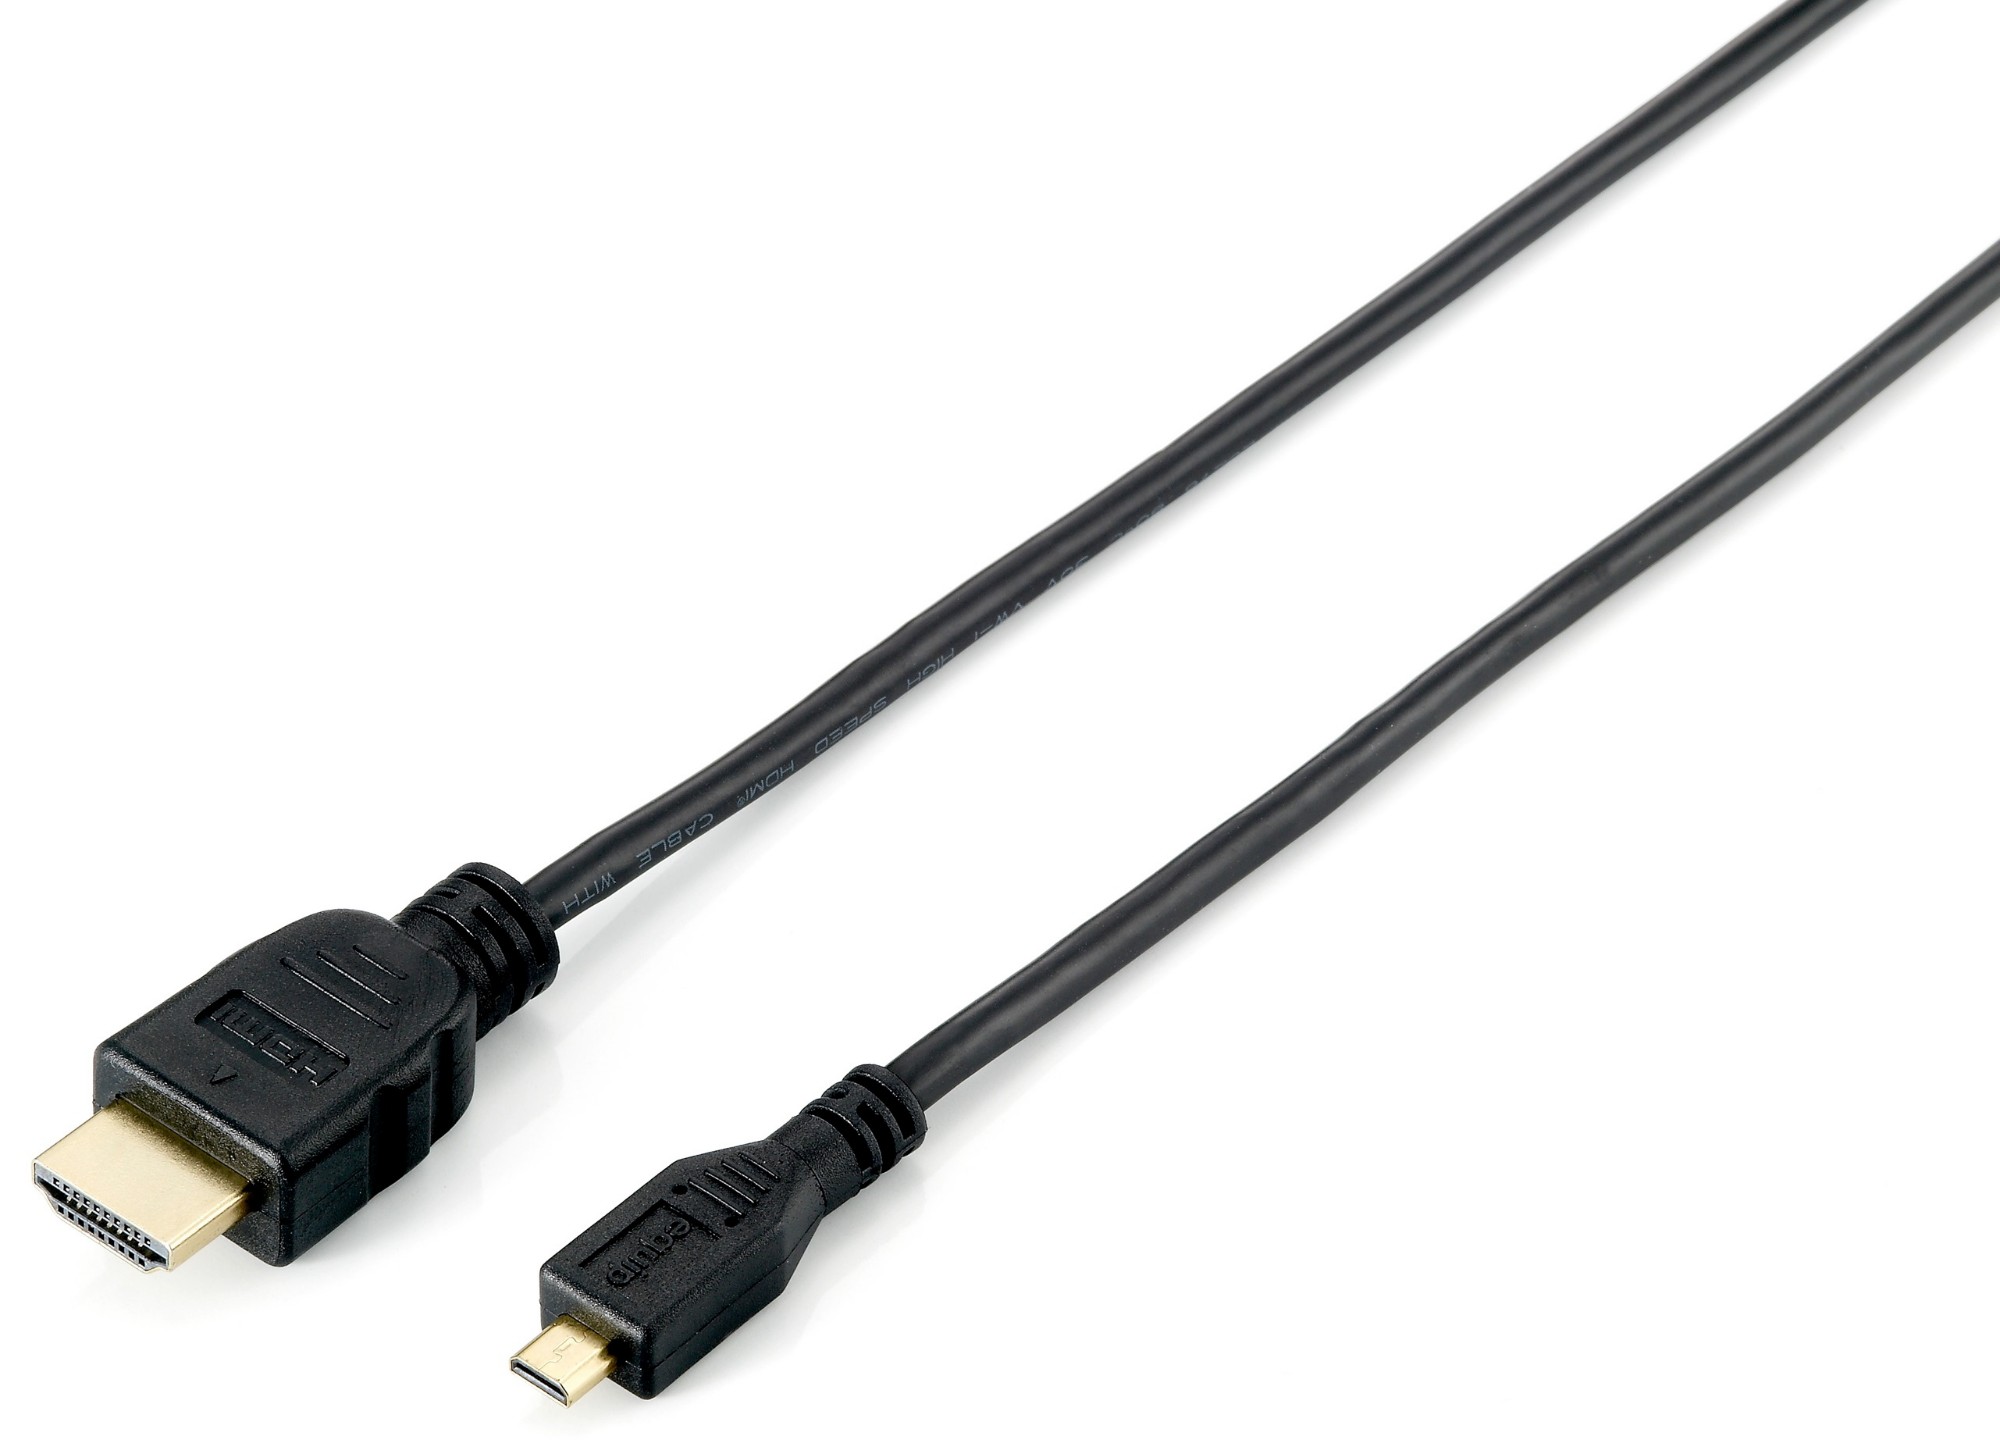 Photos - Cable (video, audio, USB) Equip HDMI 1.4 to Micro HDMI Cable, 2m 119308 